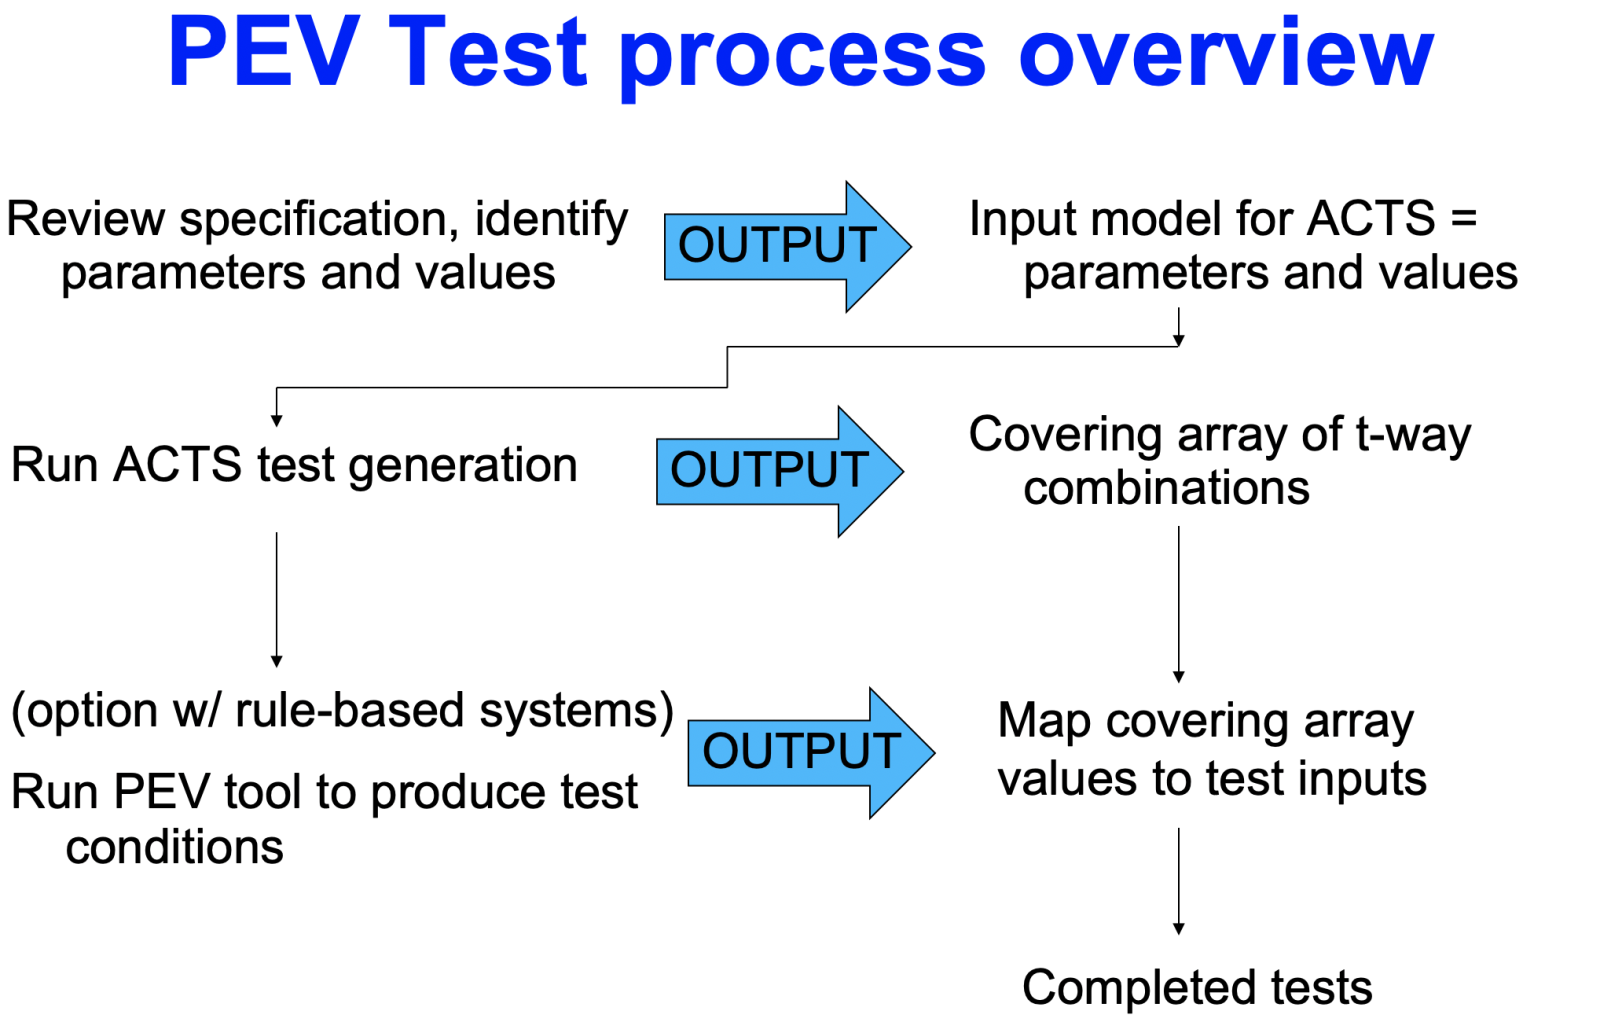 PEV test process overview